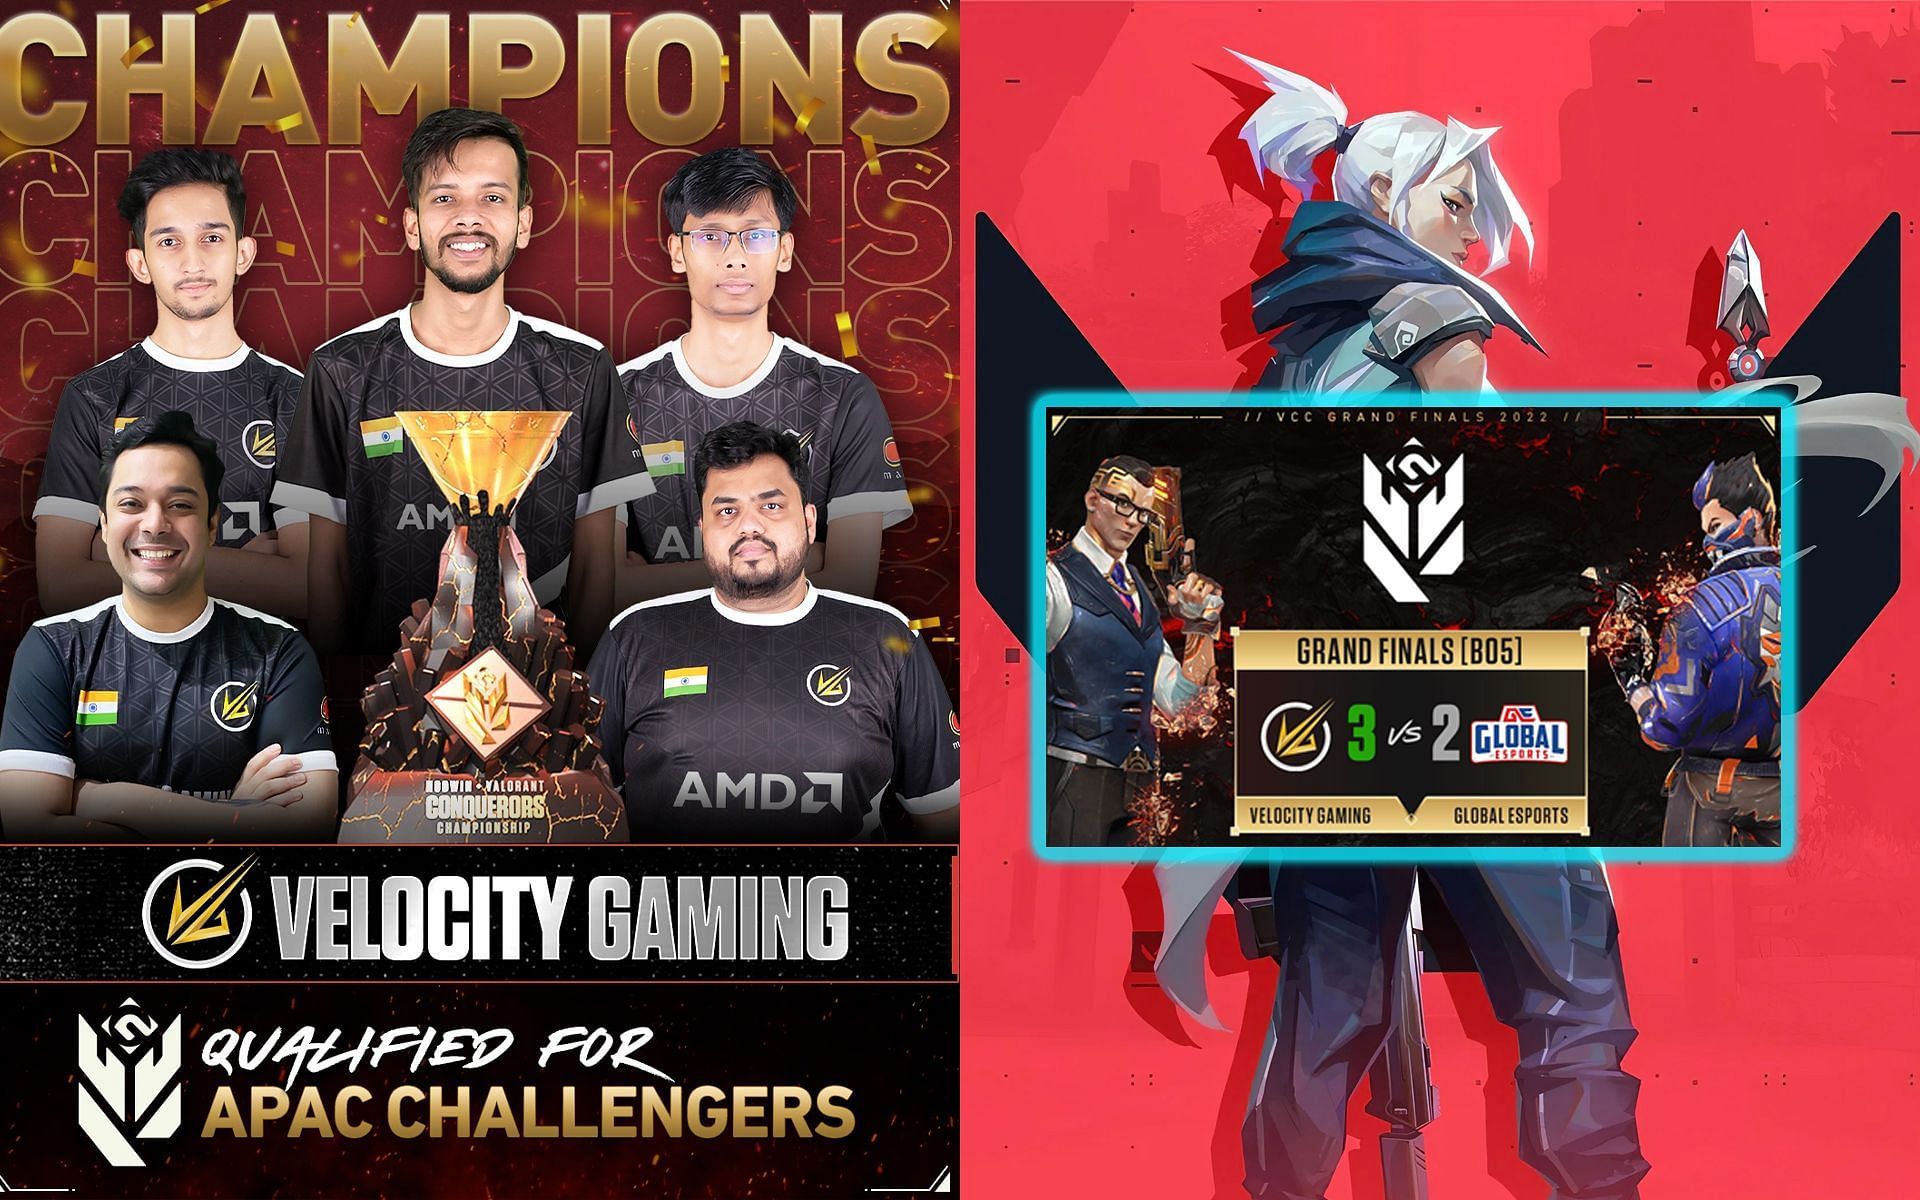 Indian Valorant team Velocity Gaming becomes VCC 2022 champions after defeating Global Esports (Image via Nodwin/Riot Games)